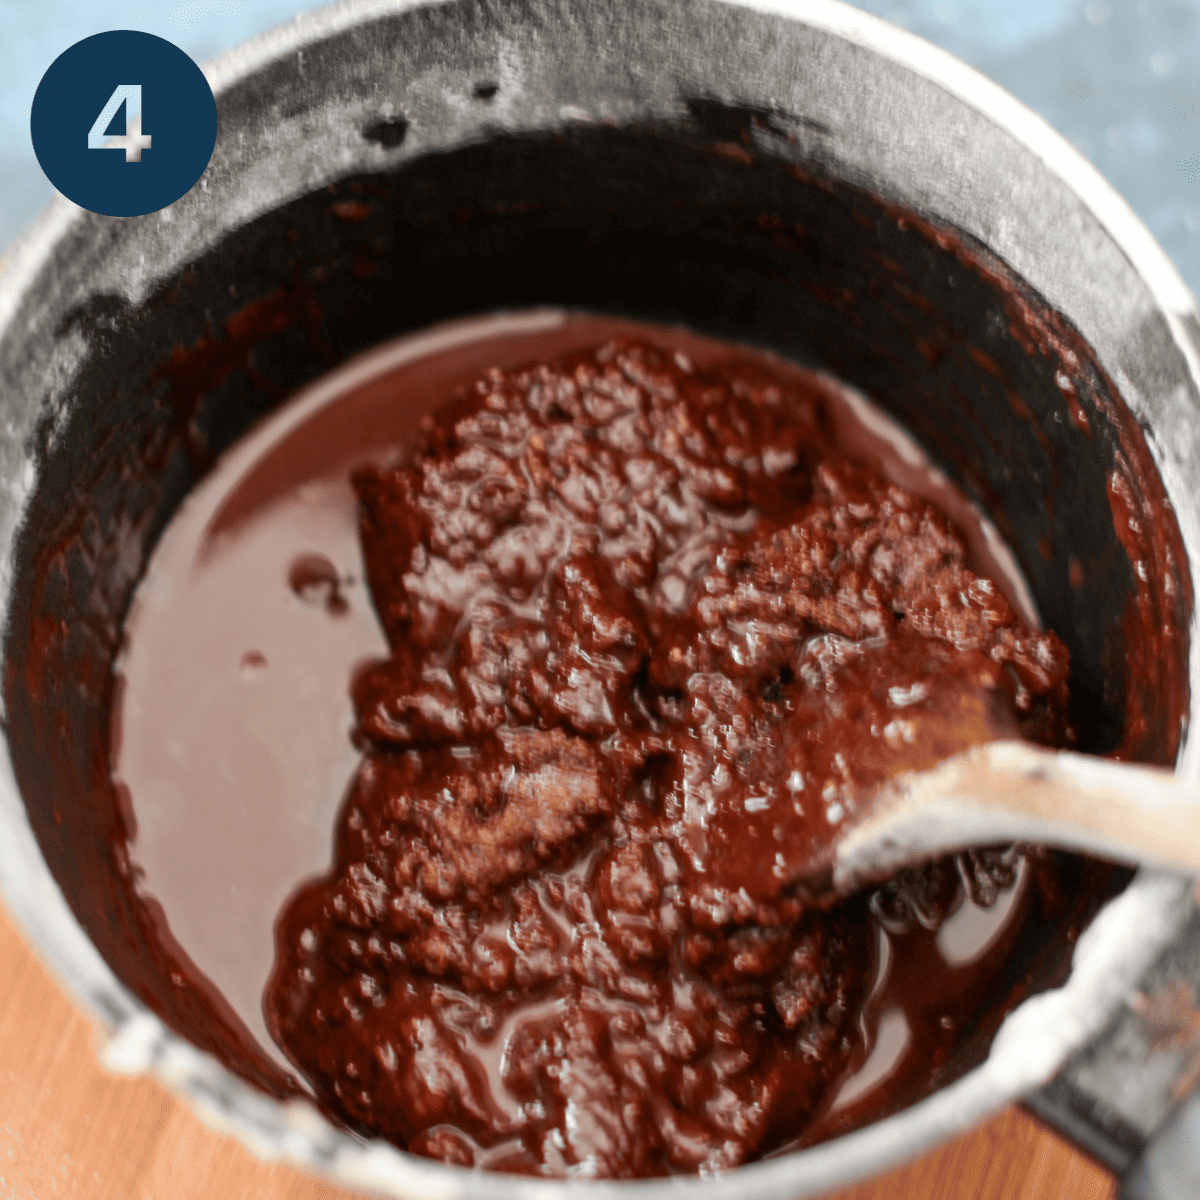 Adding icing sugat to melted chocolate.